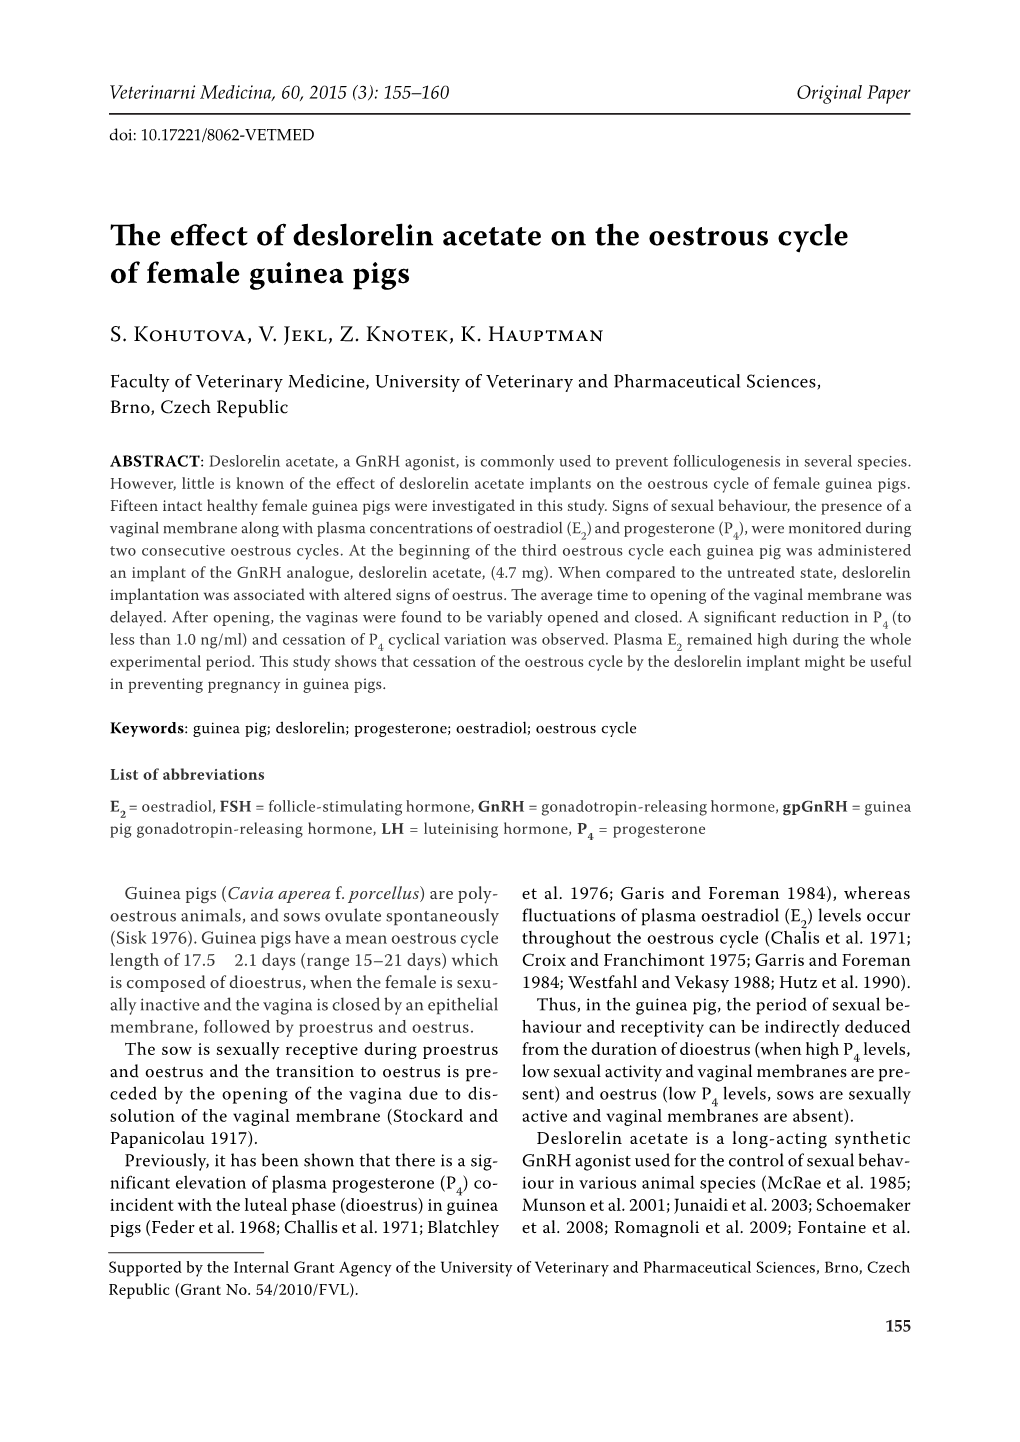 The Effect of Deslorelin Acetate on the Oestrous Cycle of Female Guinea Pigs